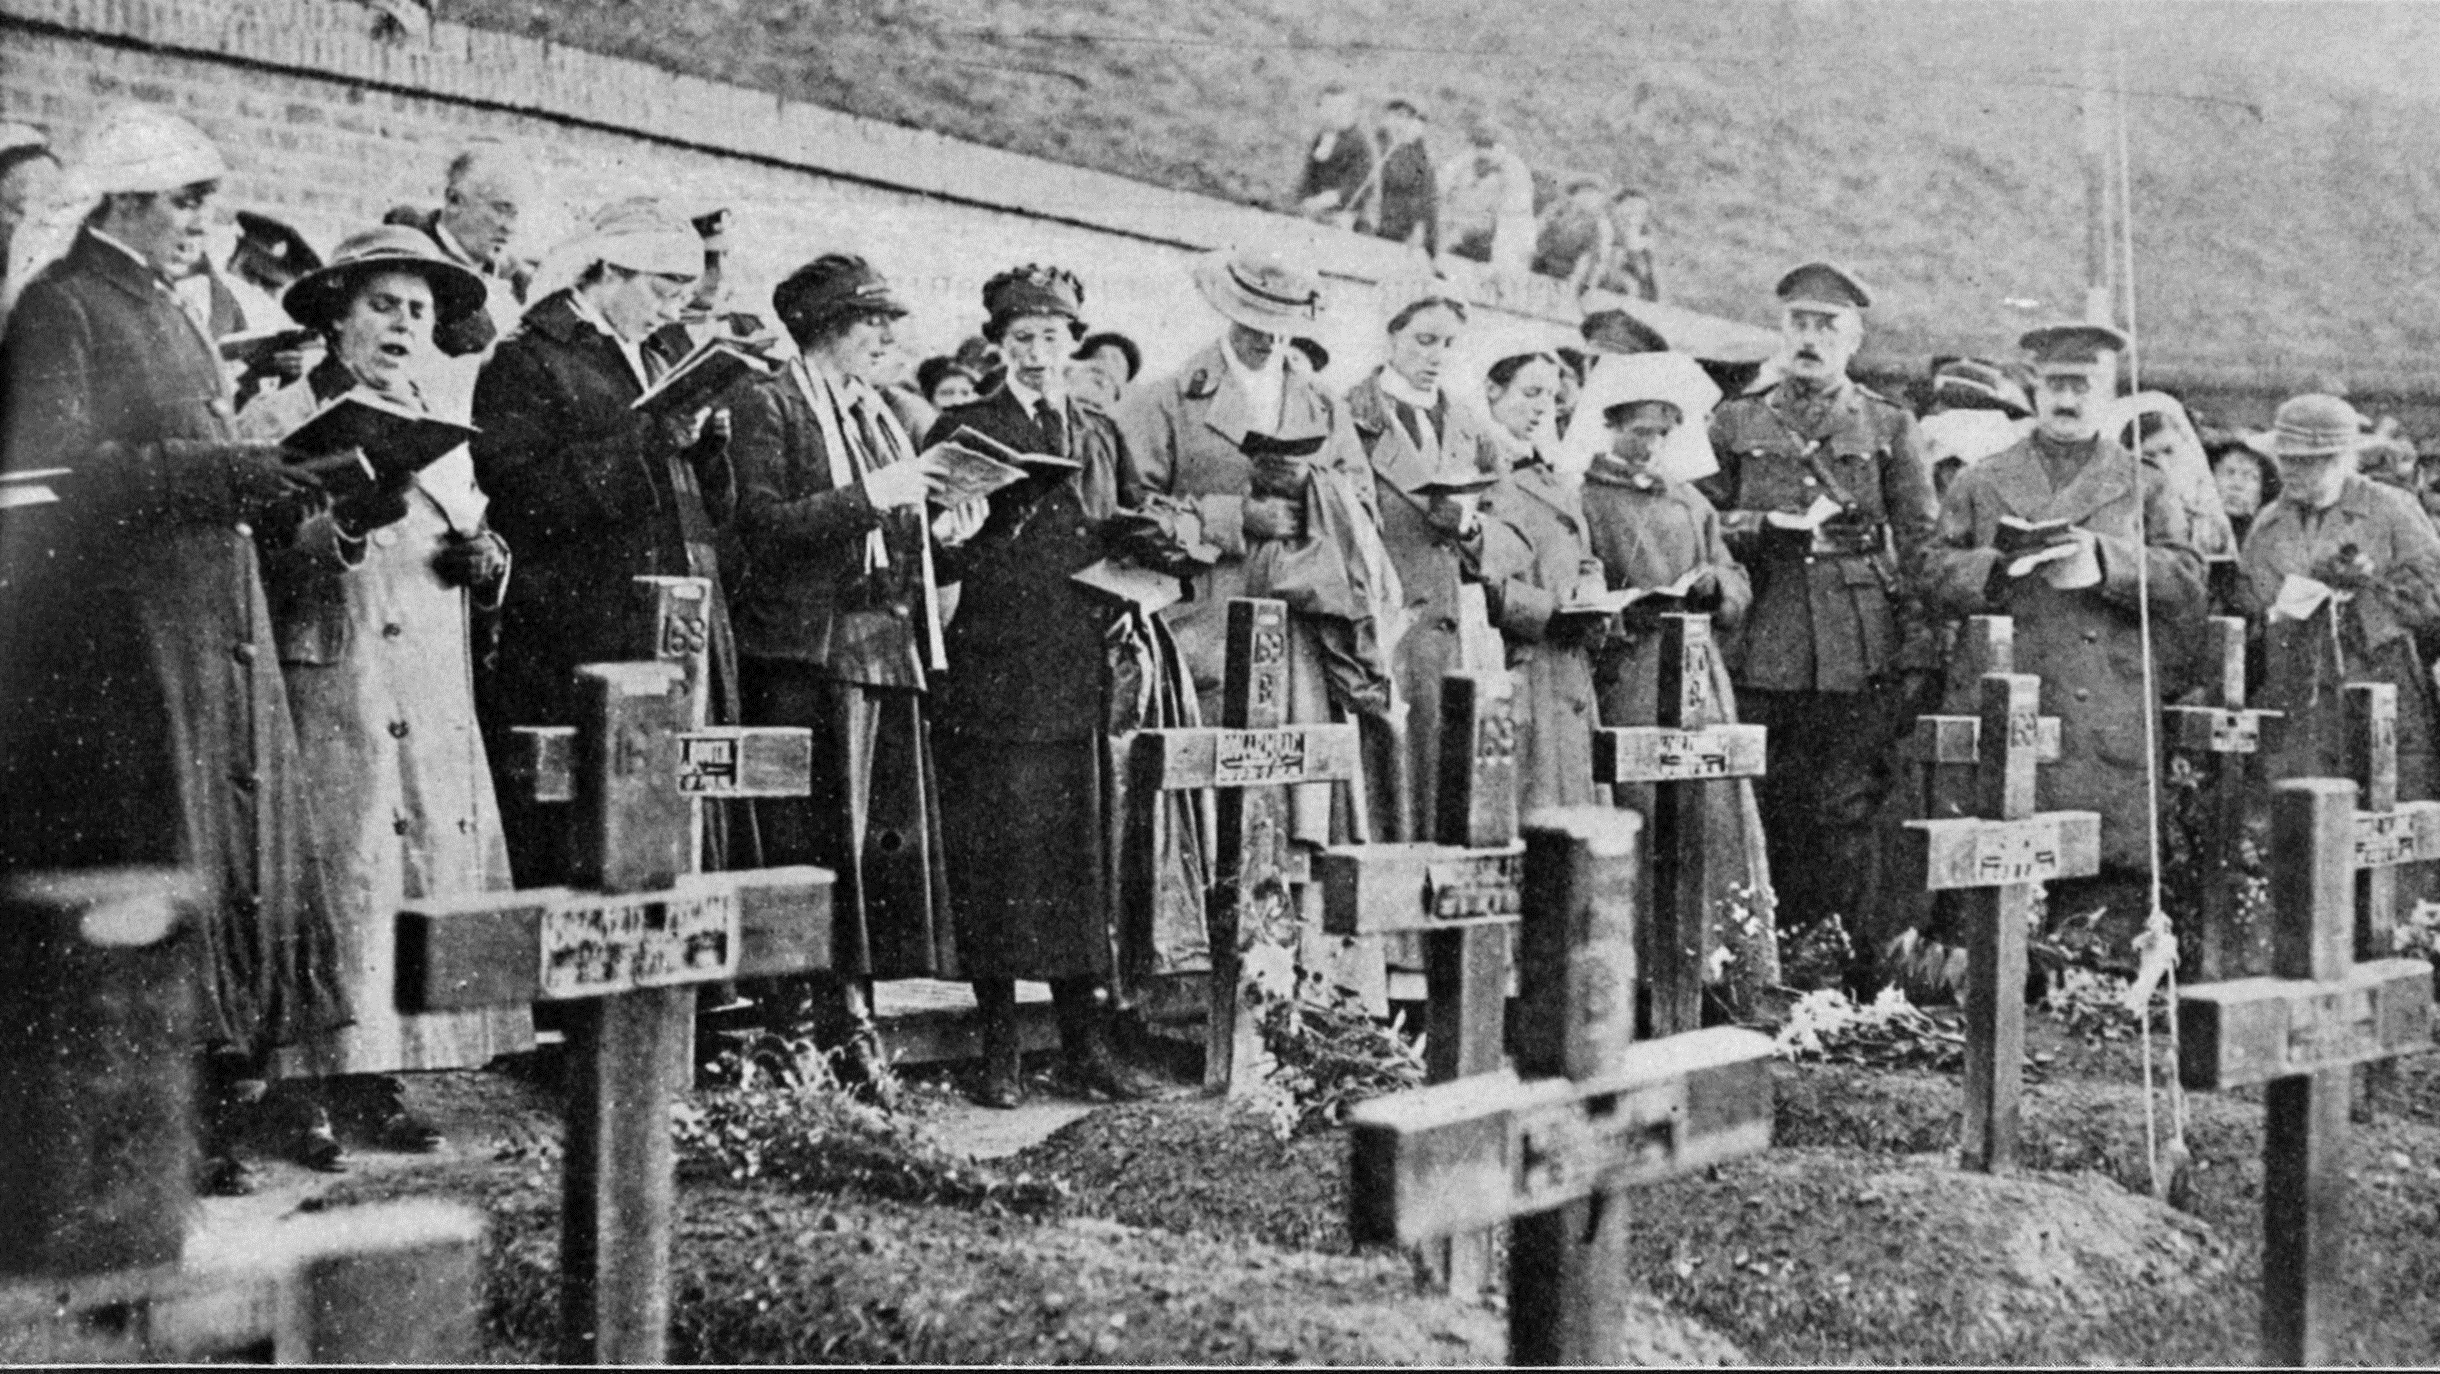 On All Saints' Day this impressive service was held in a little churchyard ``somewhere in France'...